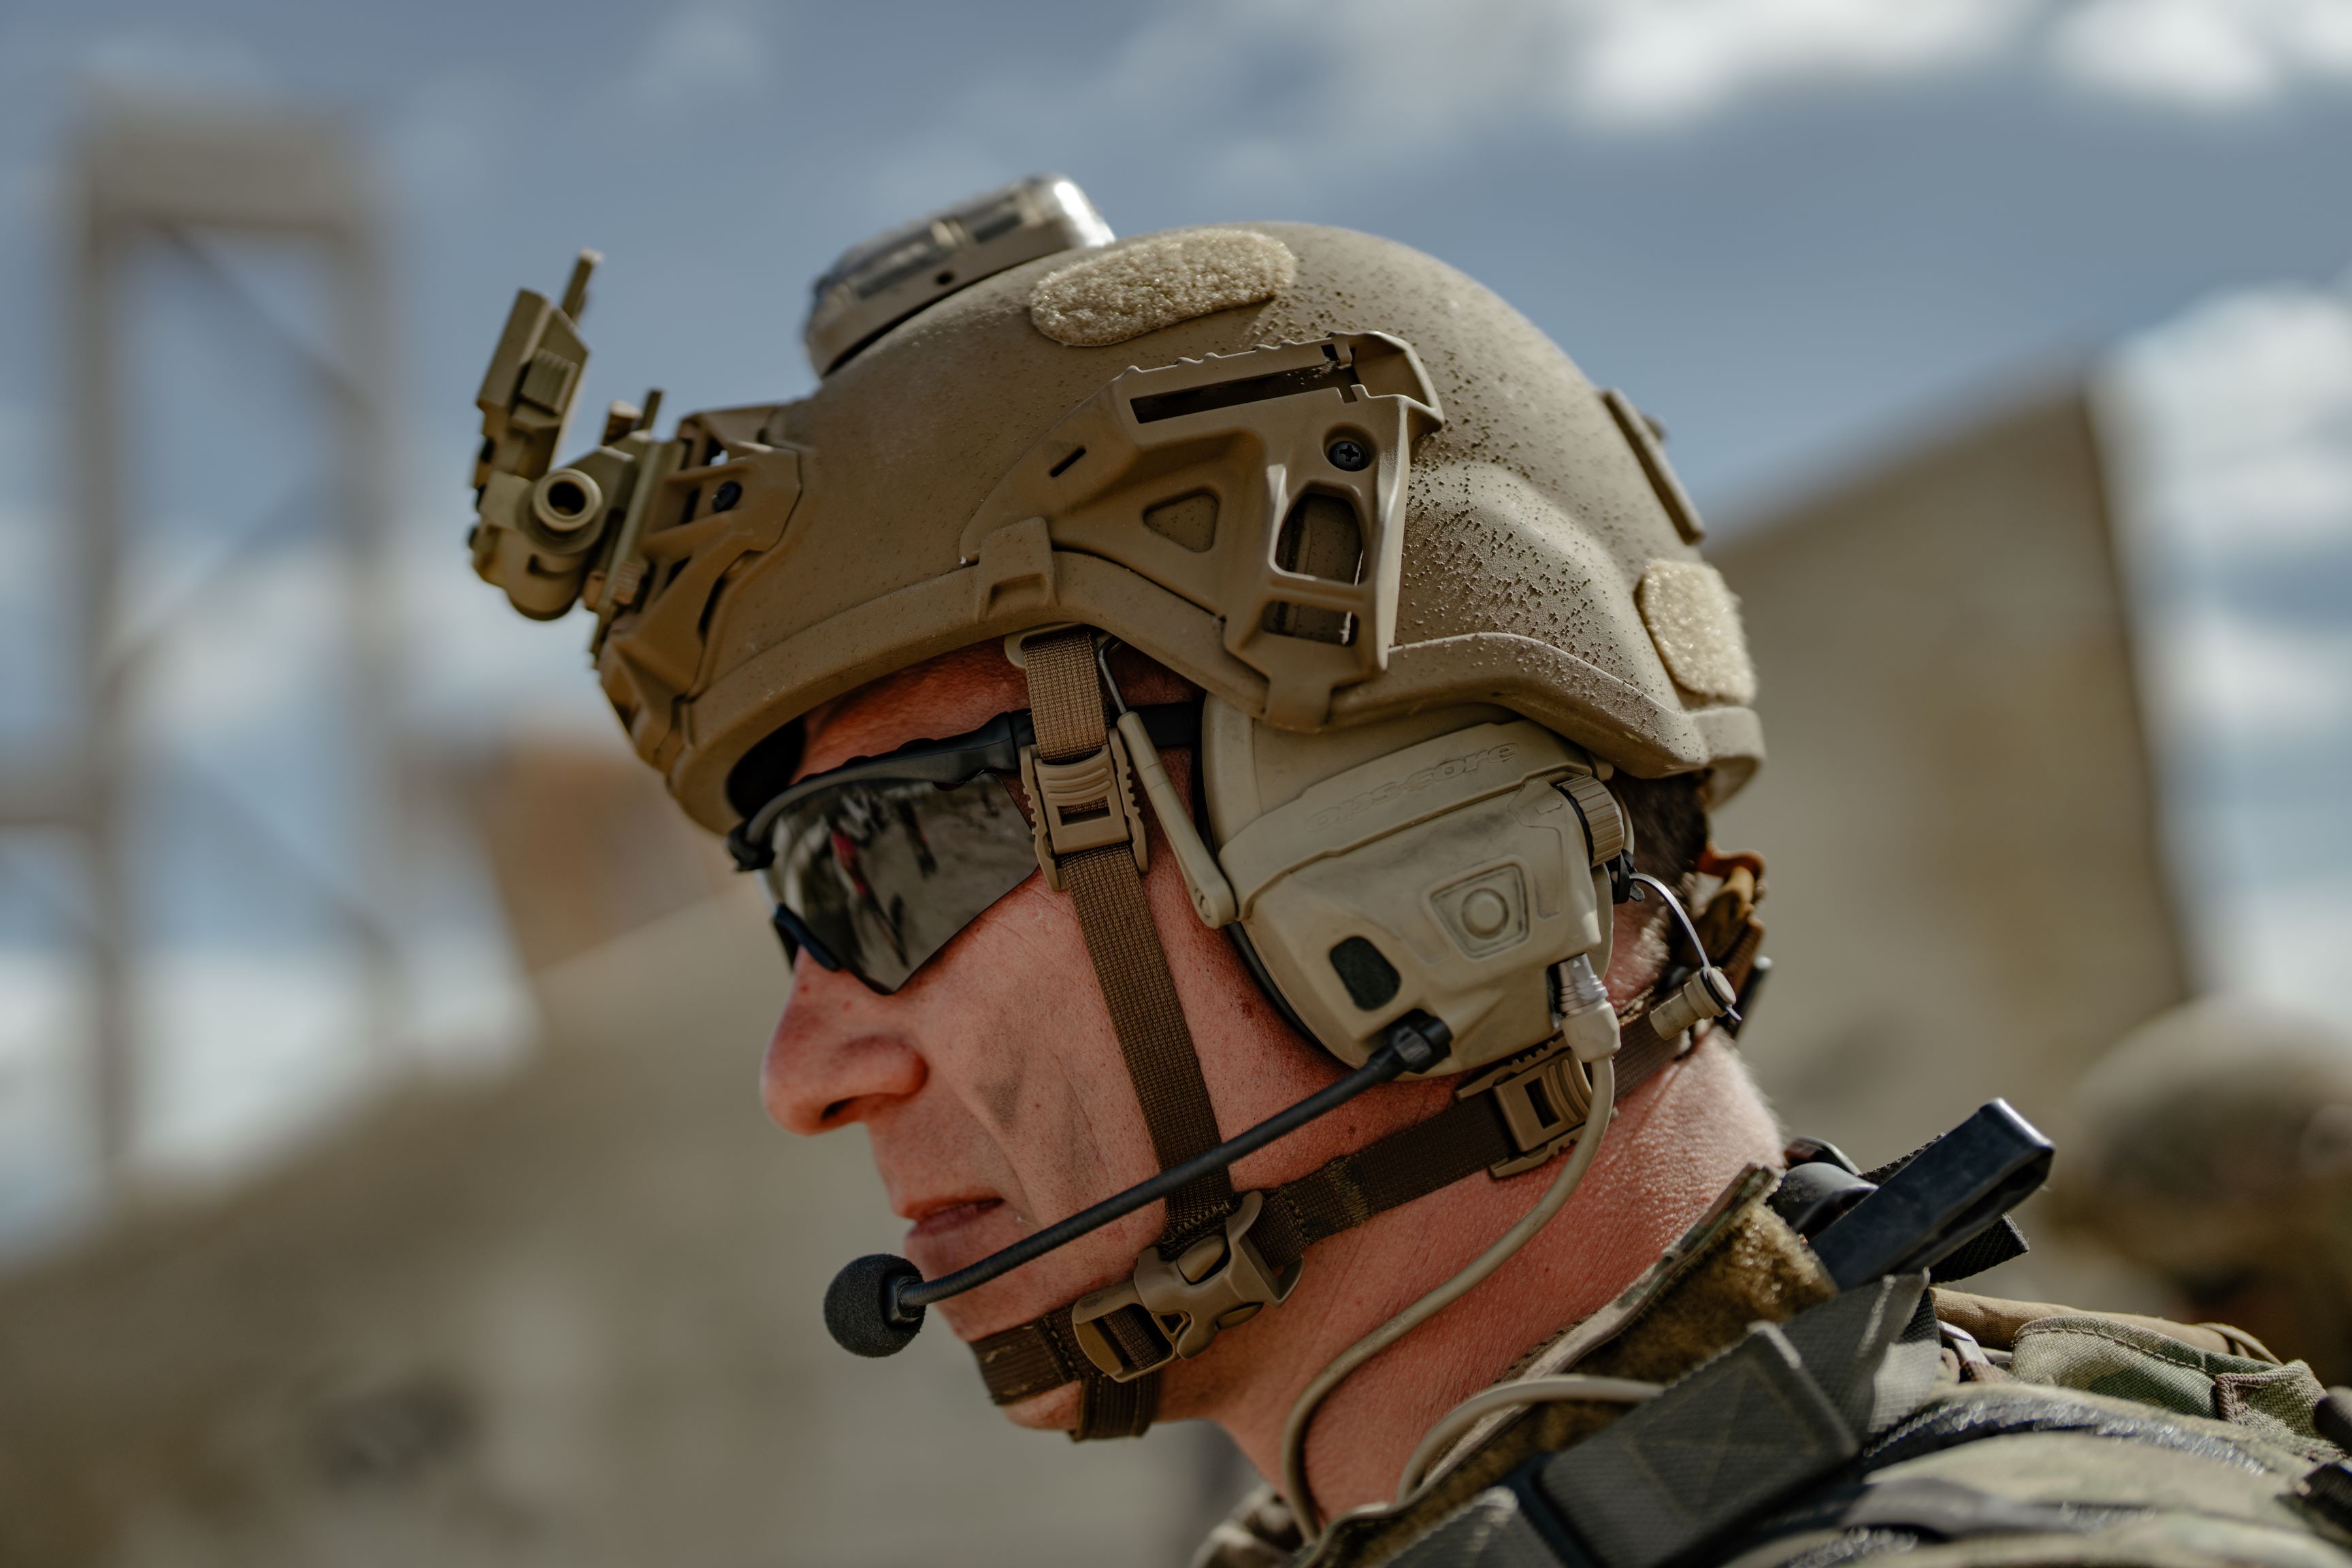 Gentex Corporation Announces Delivery Order for U.S Army Next Generation Integrated Head Protection System (NG IHPS) Helmet Program